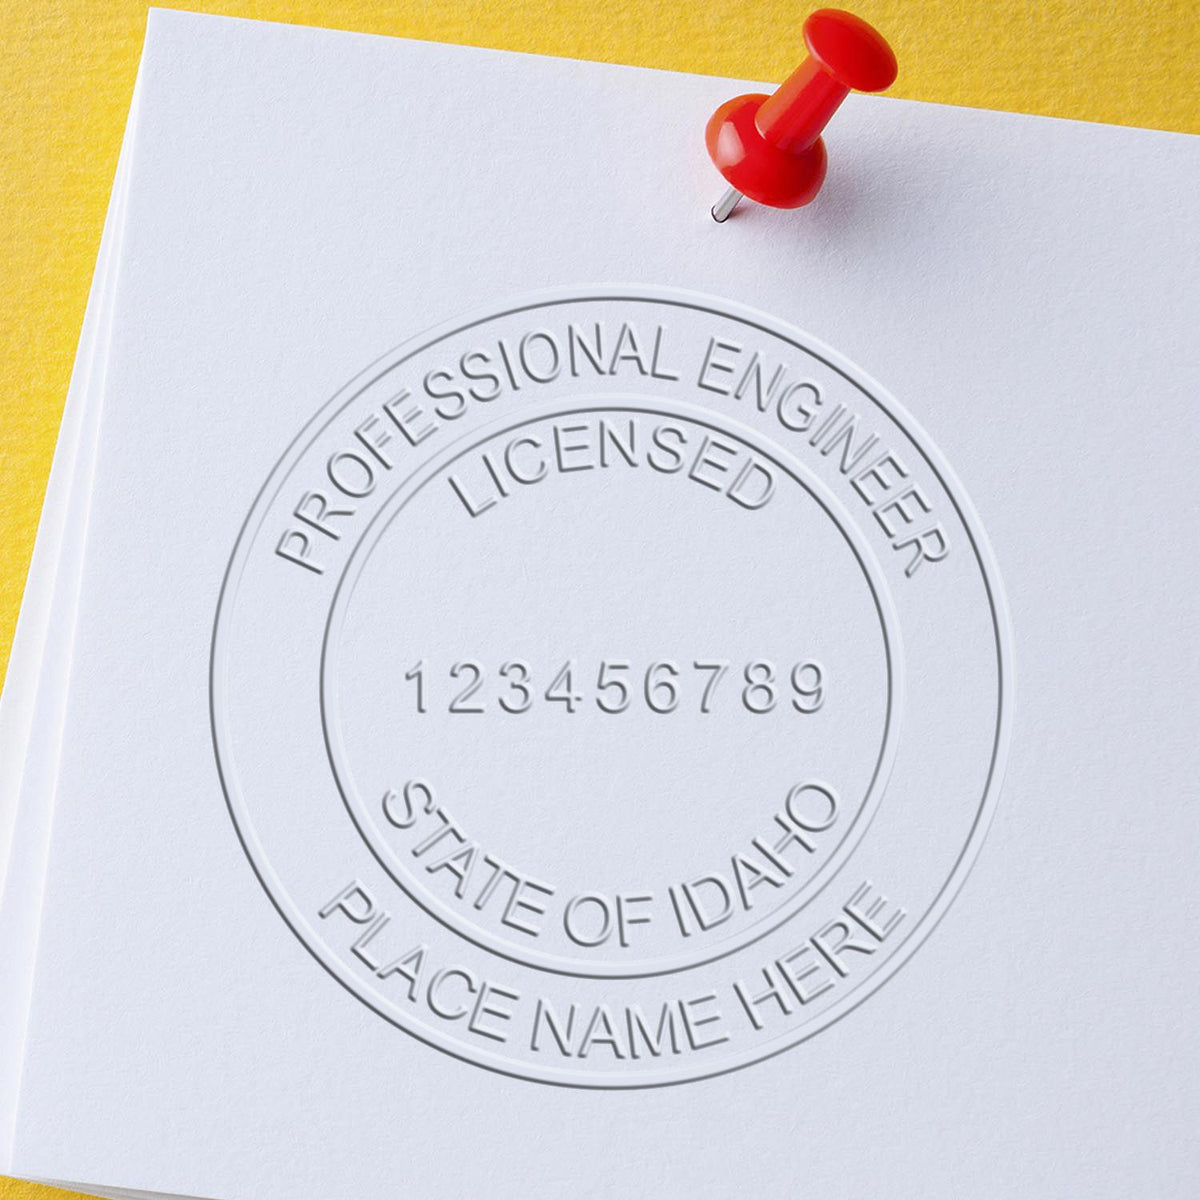 A photograph of the Soft Idaho Professional Engineer Seal stamp impression reveals a vivid, professional image of the on paper.